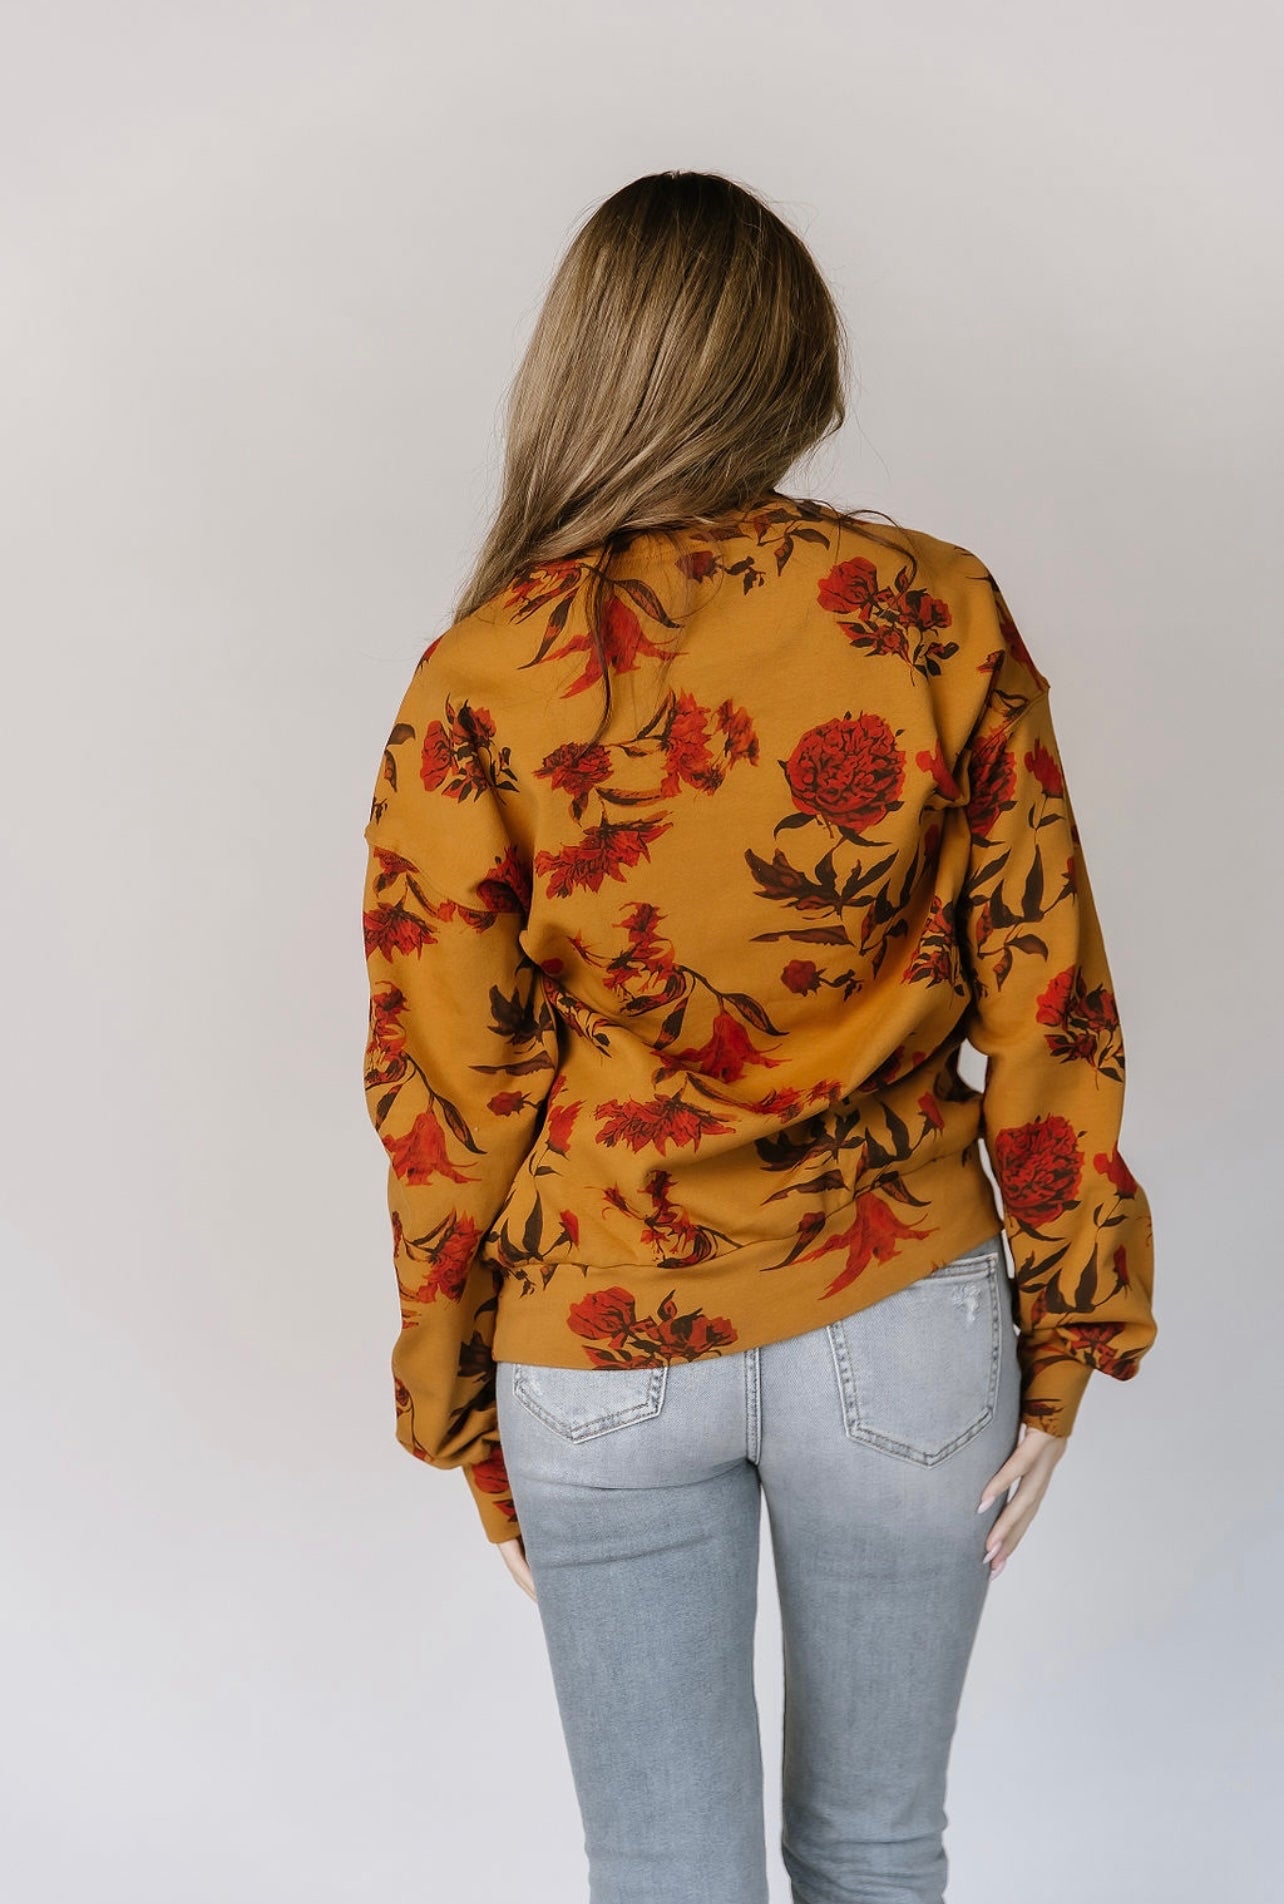 & Ave- University Pull Over- Fall Bouquet-XL left